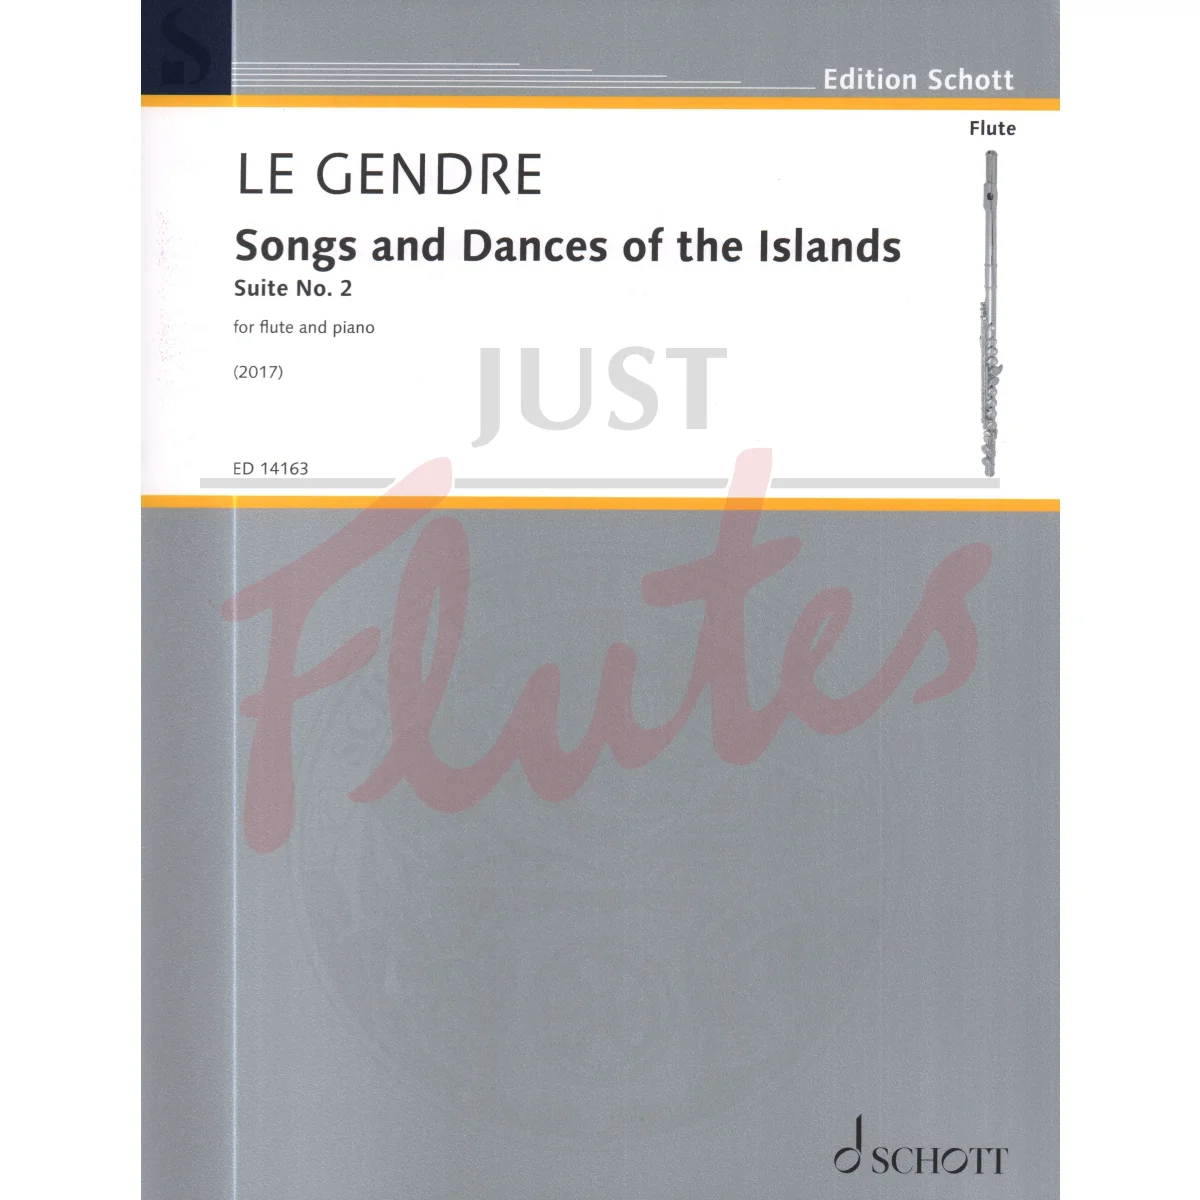 Songs and Dances of the Islands Suite No. 2 for Flute and Piano